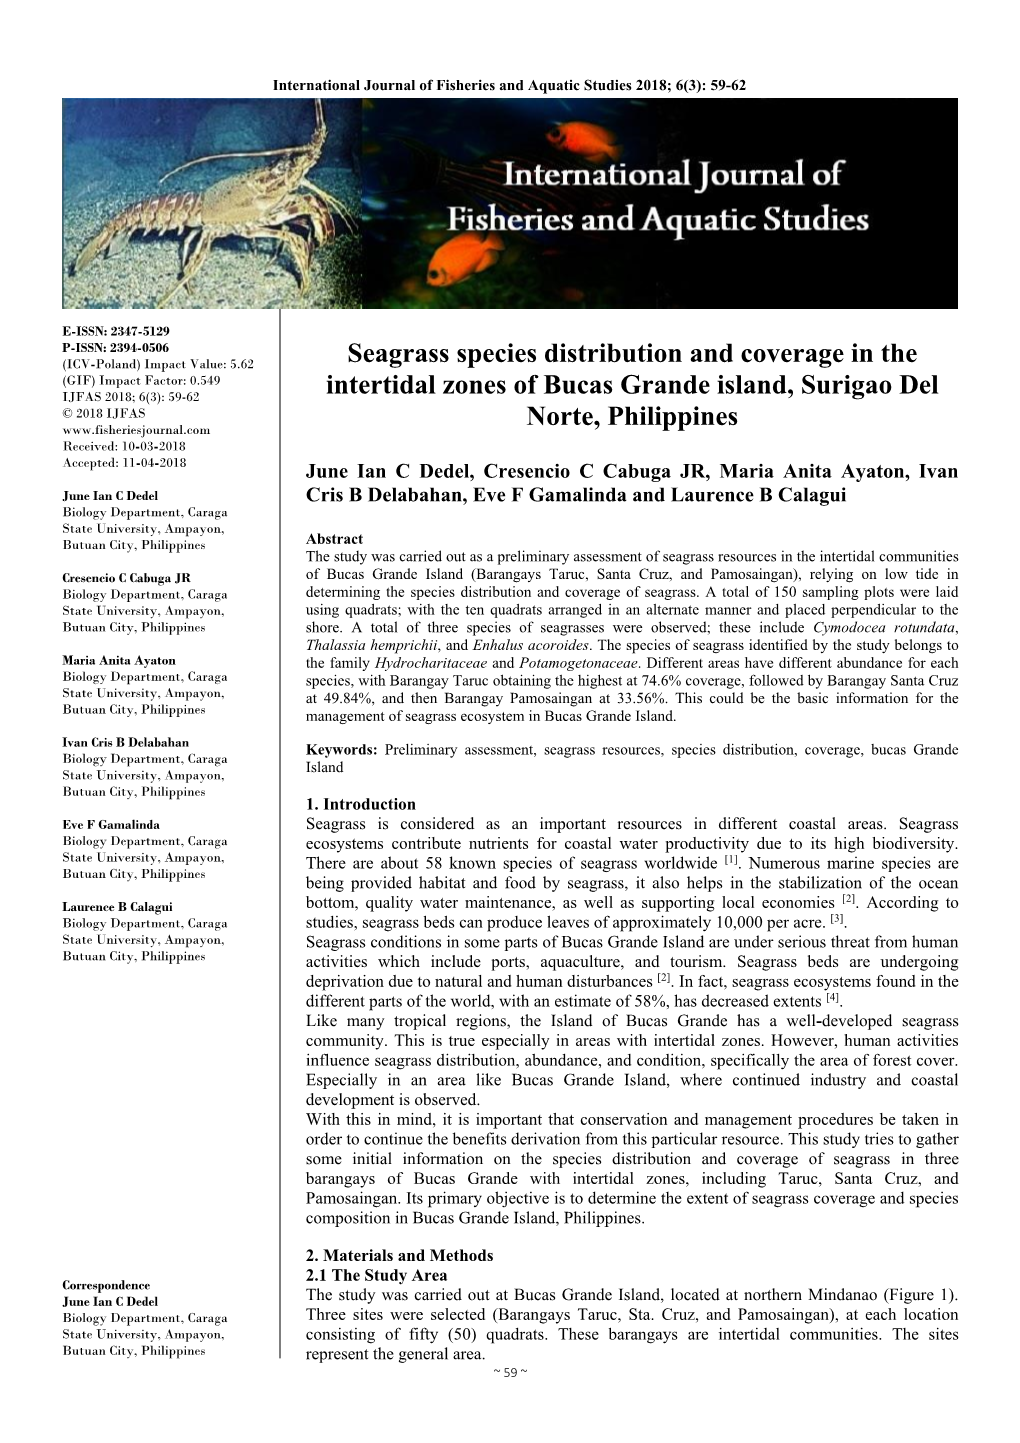 Seagrass Species Distribution and Coverage in the Intertidal Zones Of